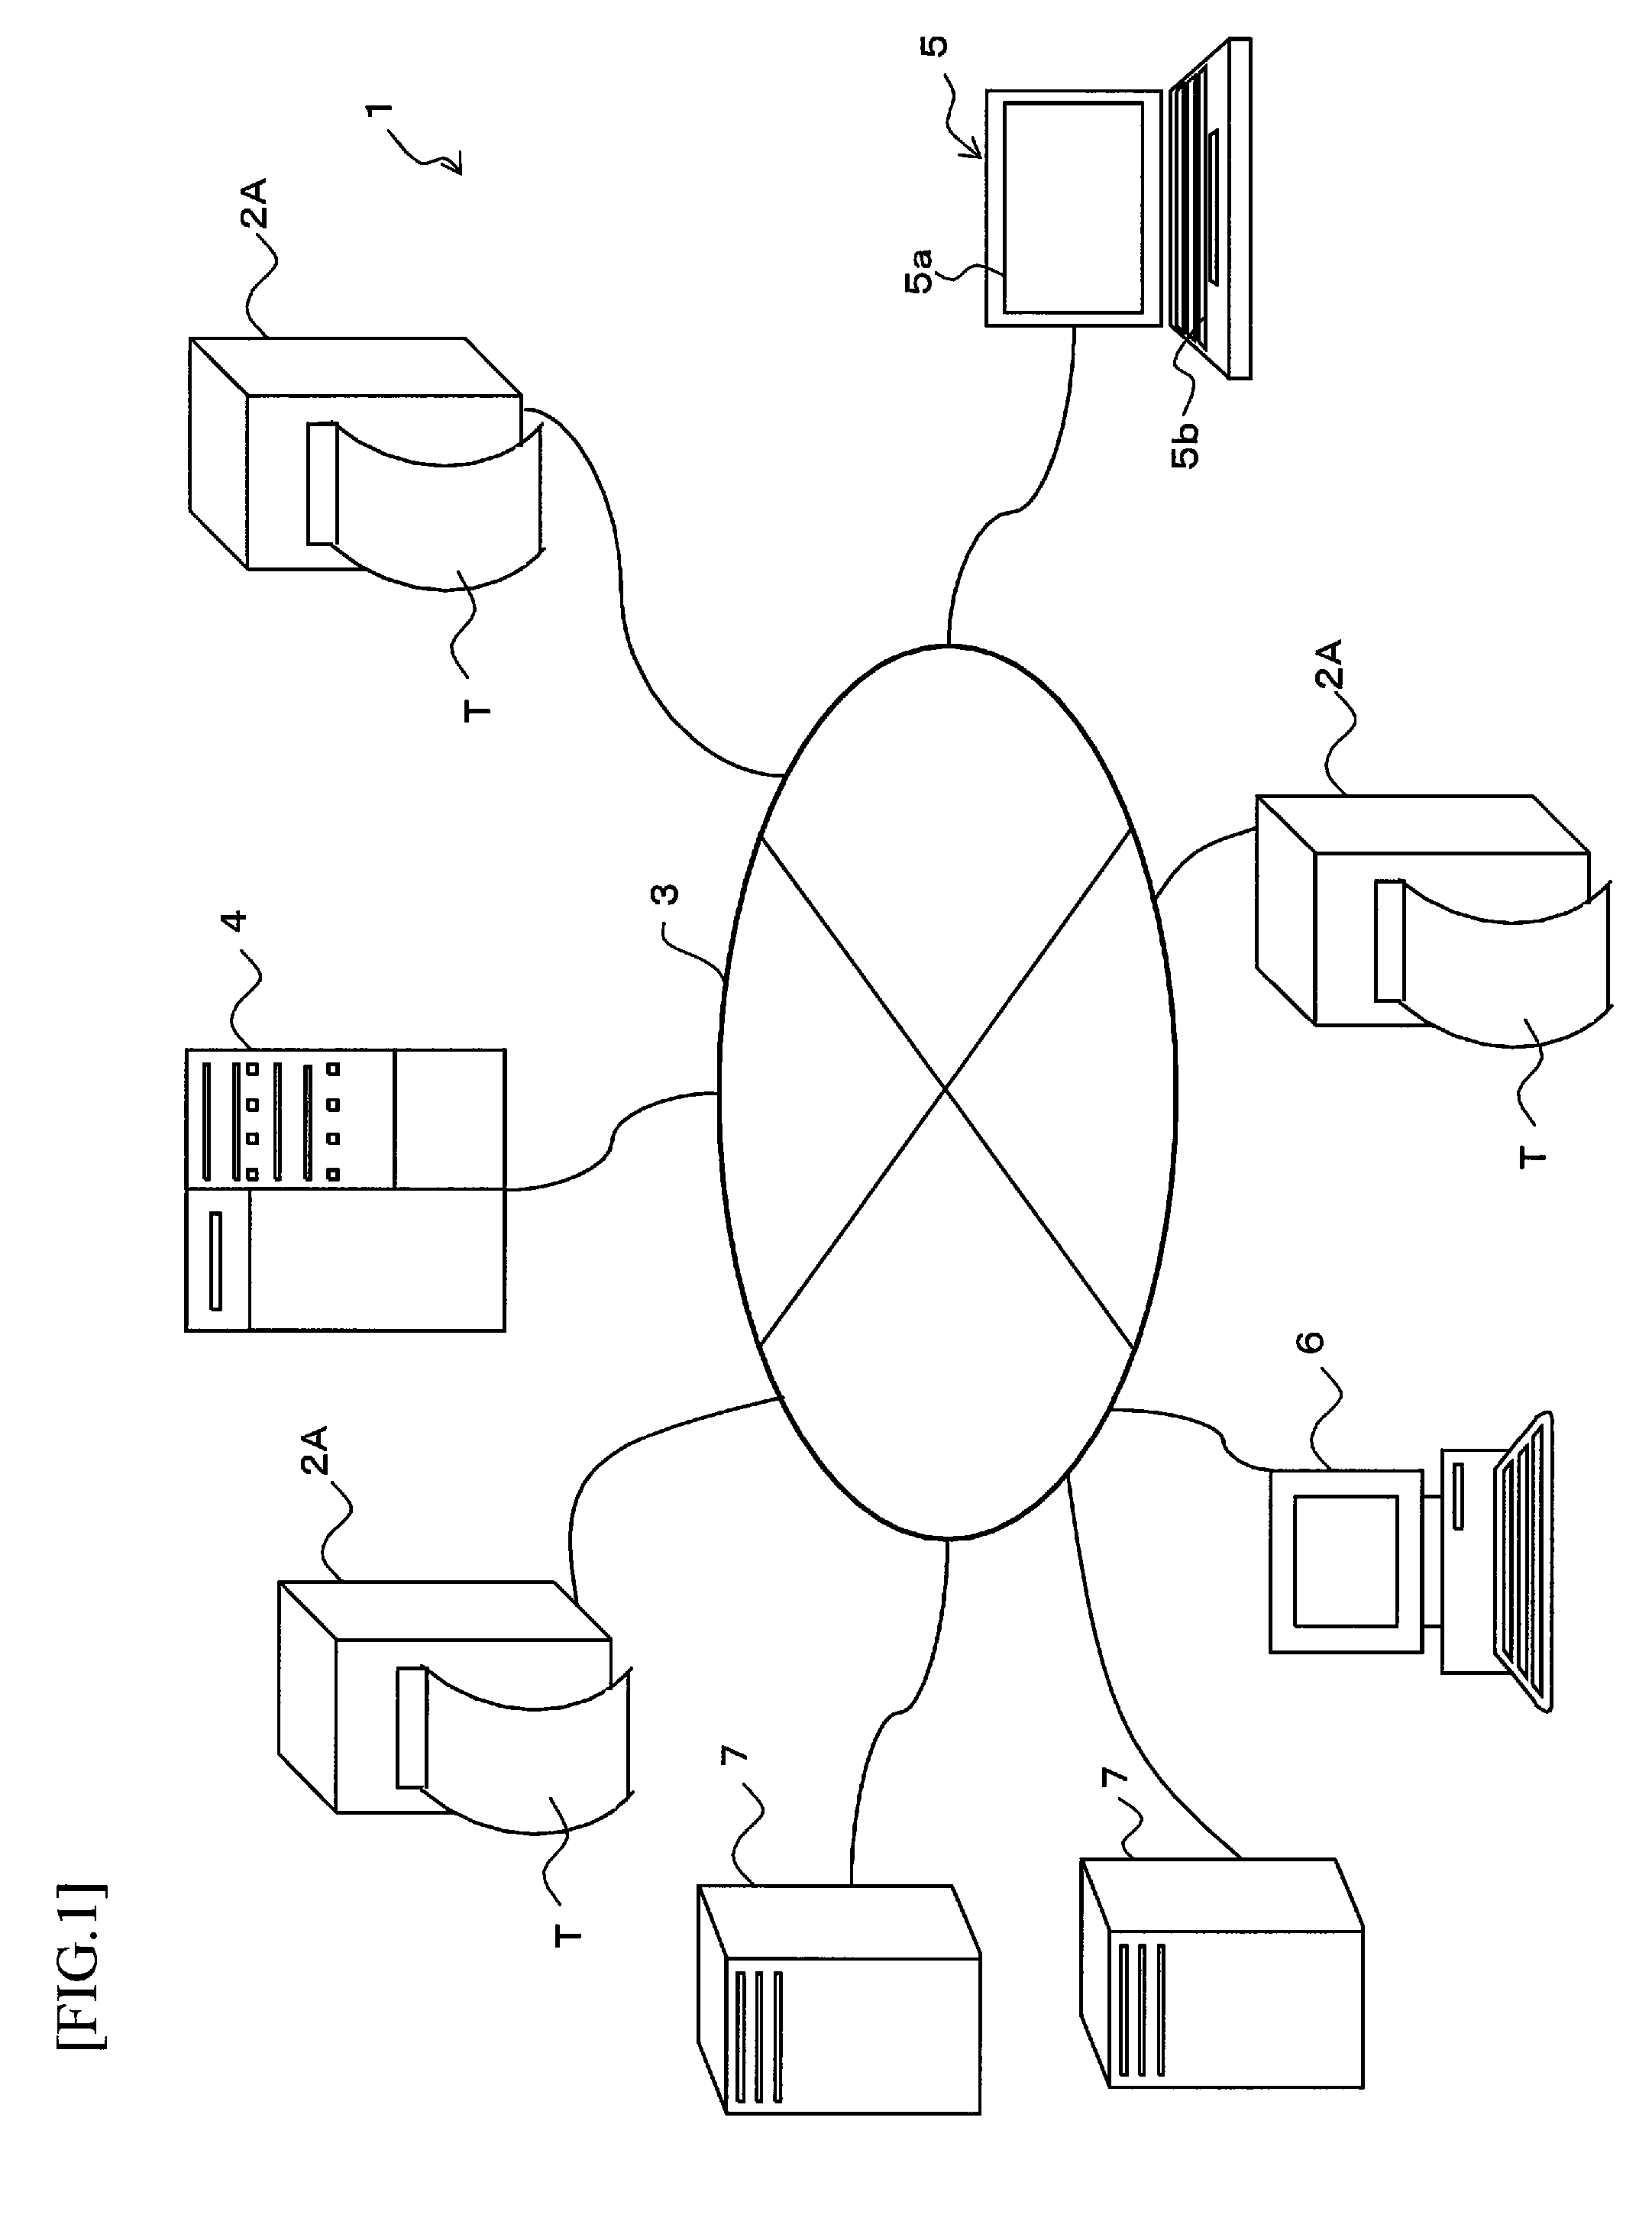 System and apparatus for managing information and communicating with a RFID tag